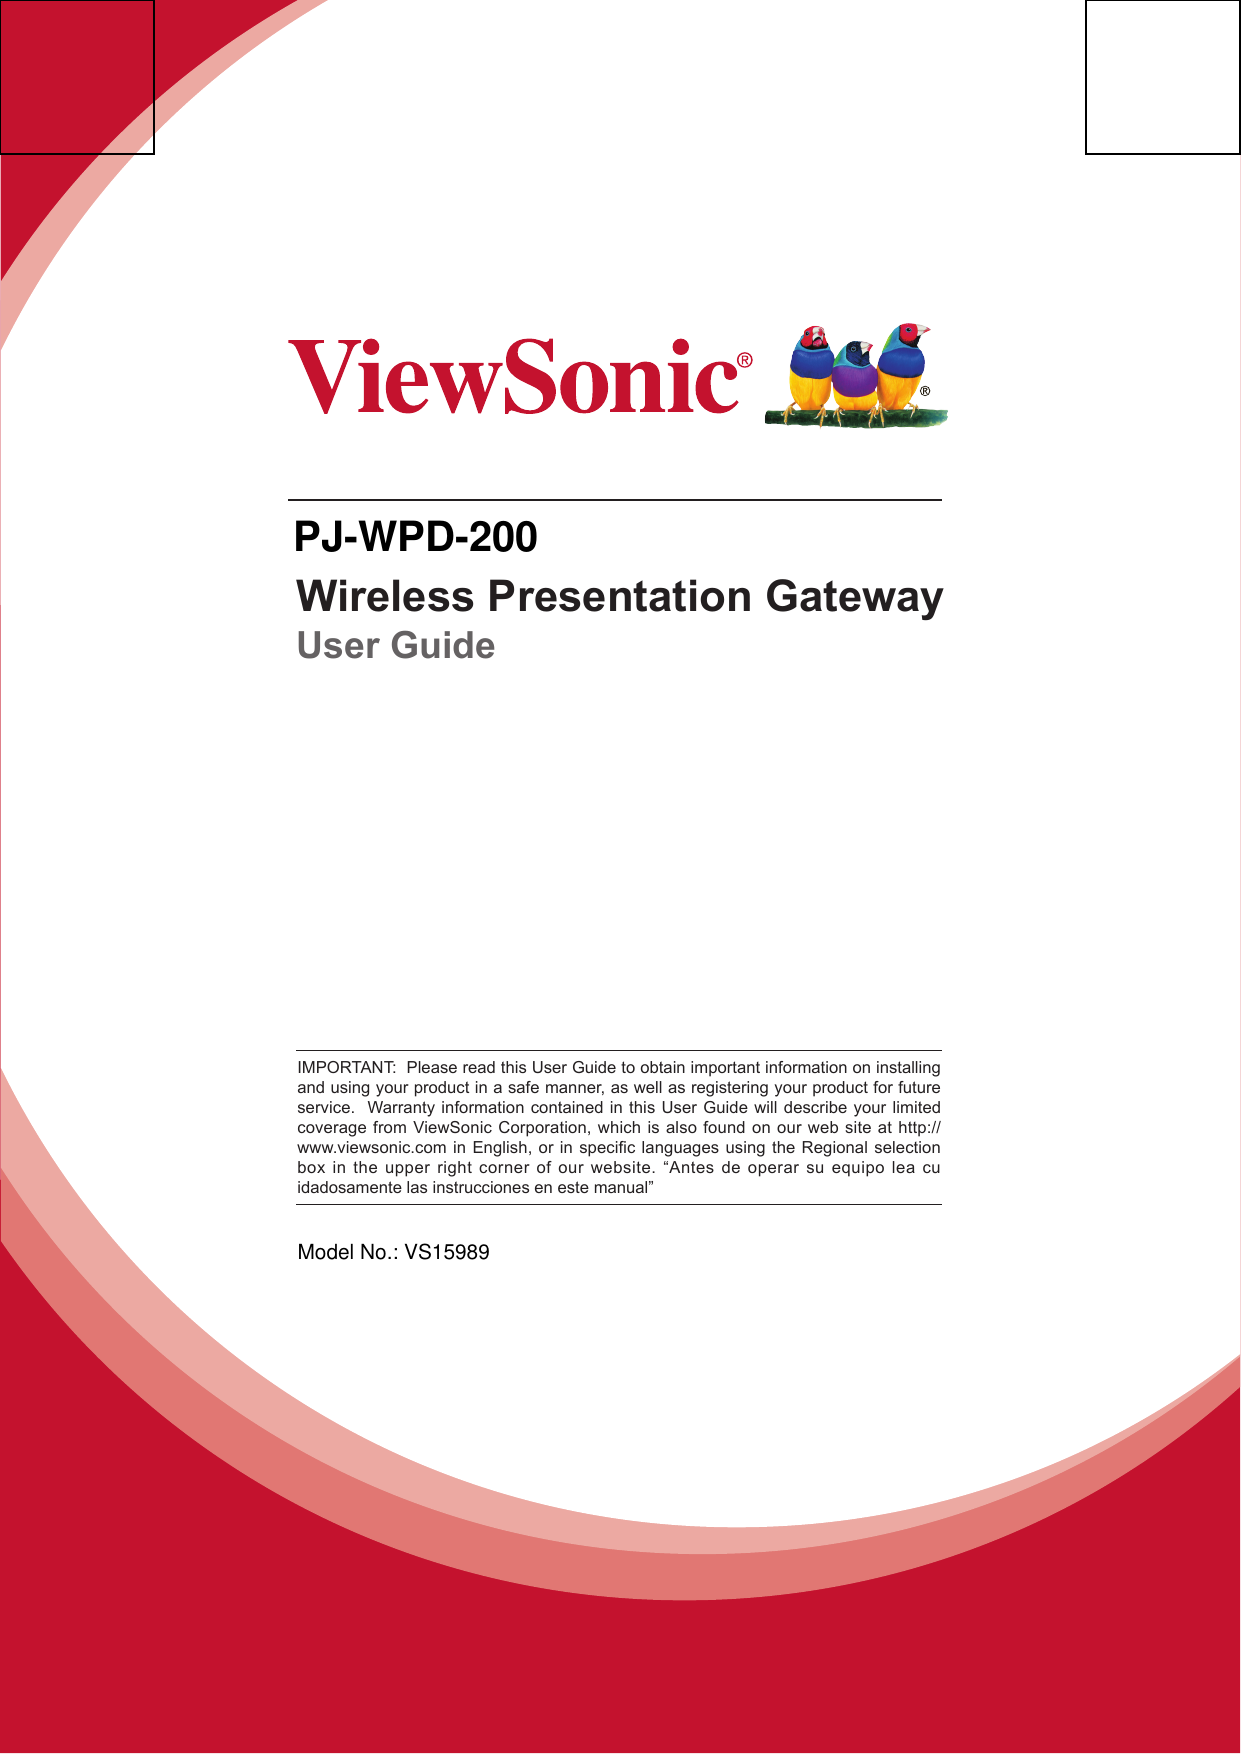 Wireless Presentation GatewayUser GuideIMPORTANT:  Please read this User Guide to obtain important information on installing and using your product in a safe manner, as well as registering your product for future service.  Warranty information contained in this User Guide will describe your limited coverage from ViewSonic Corporation, which is also found on our web site at http://www.viewsonic.com in English, or in specic languages using the Regional selection box in the upper right corner of our website. “Antes de operar su equipo lea cu idadosamente las instrucciones en este manual”PJ-WPD-200Model No.: VS15989